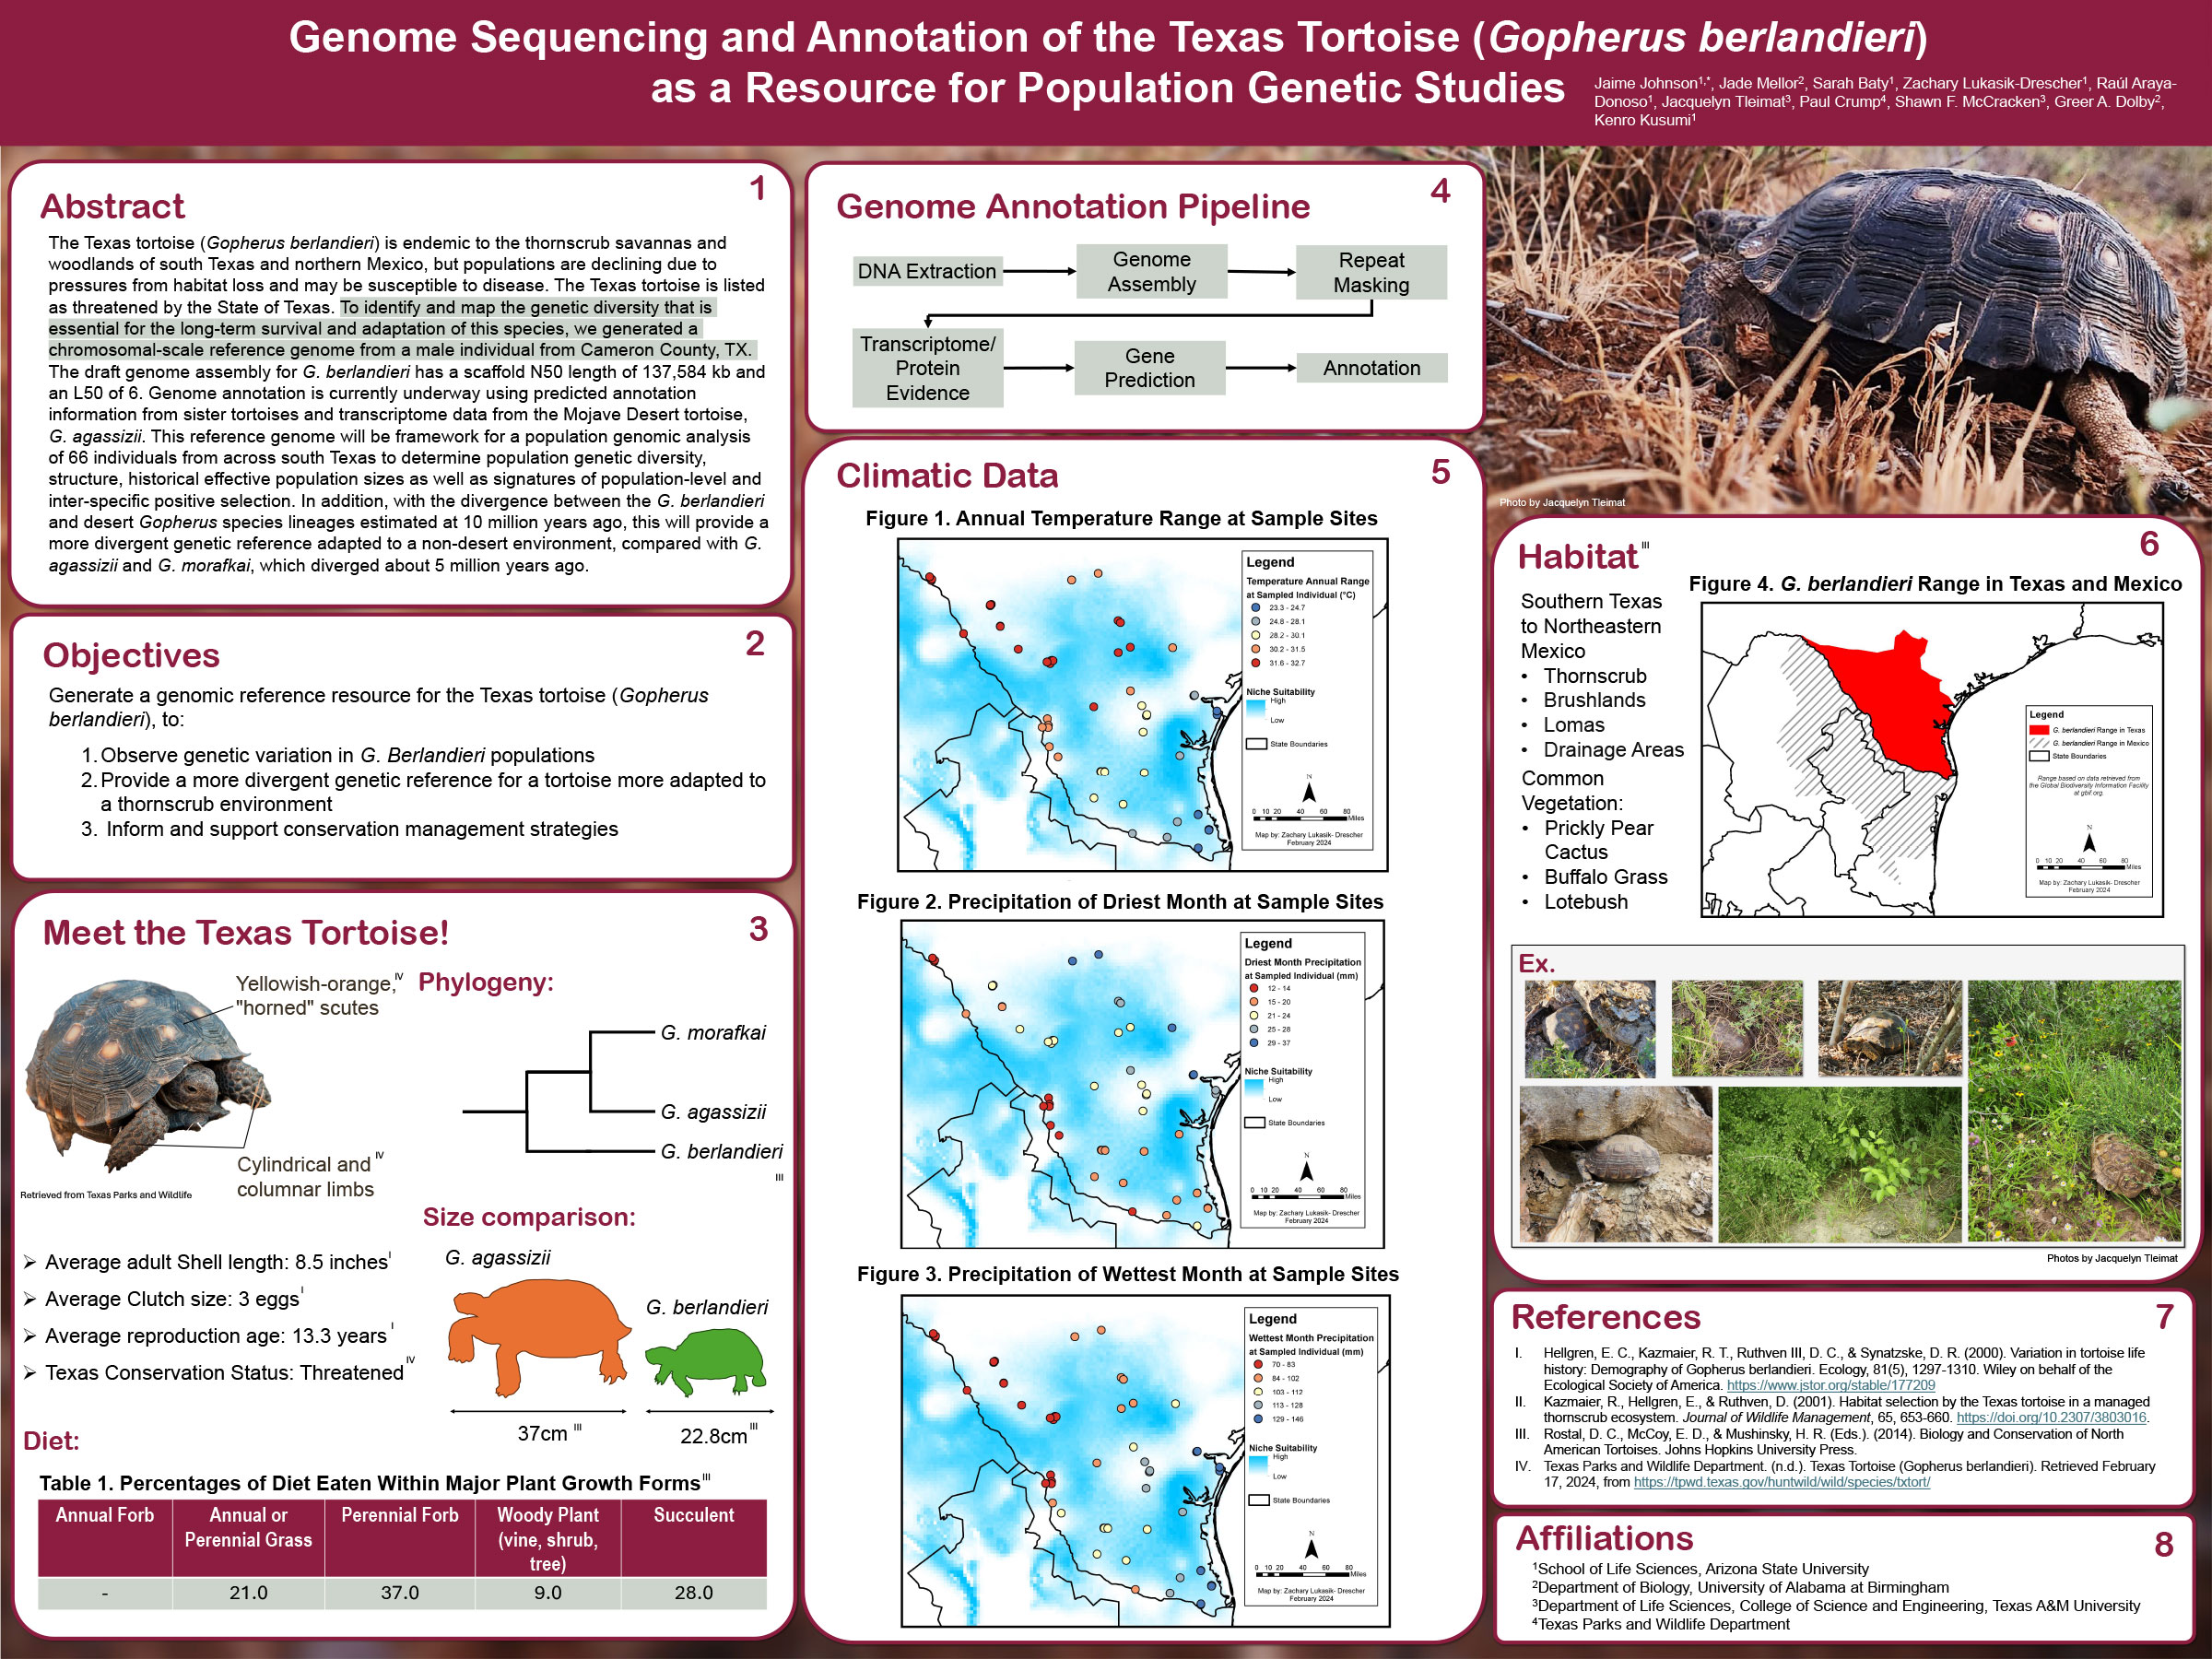 Genome Sequencing and Annotation of the Texas Tortoise (Gopherus berlandieri) as a Resource for Population Genetic Studies